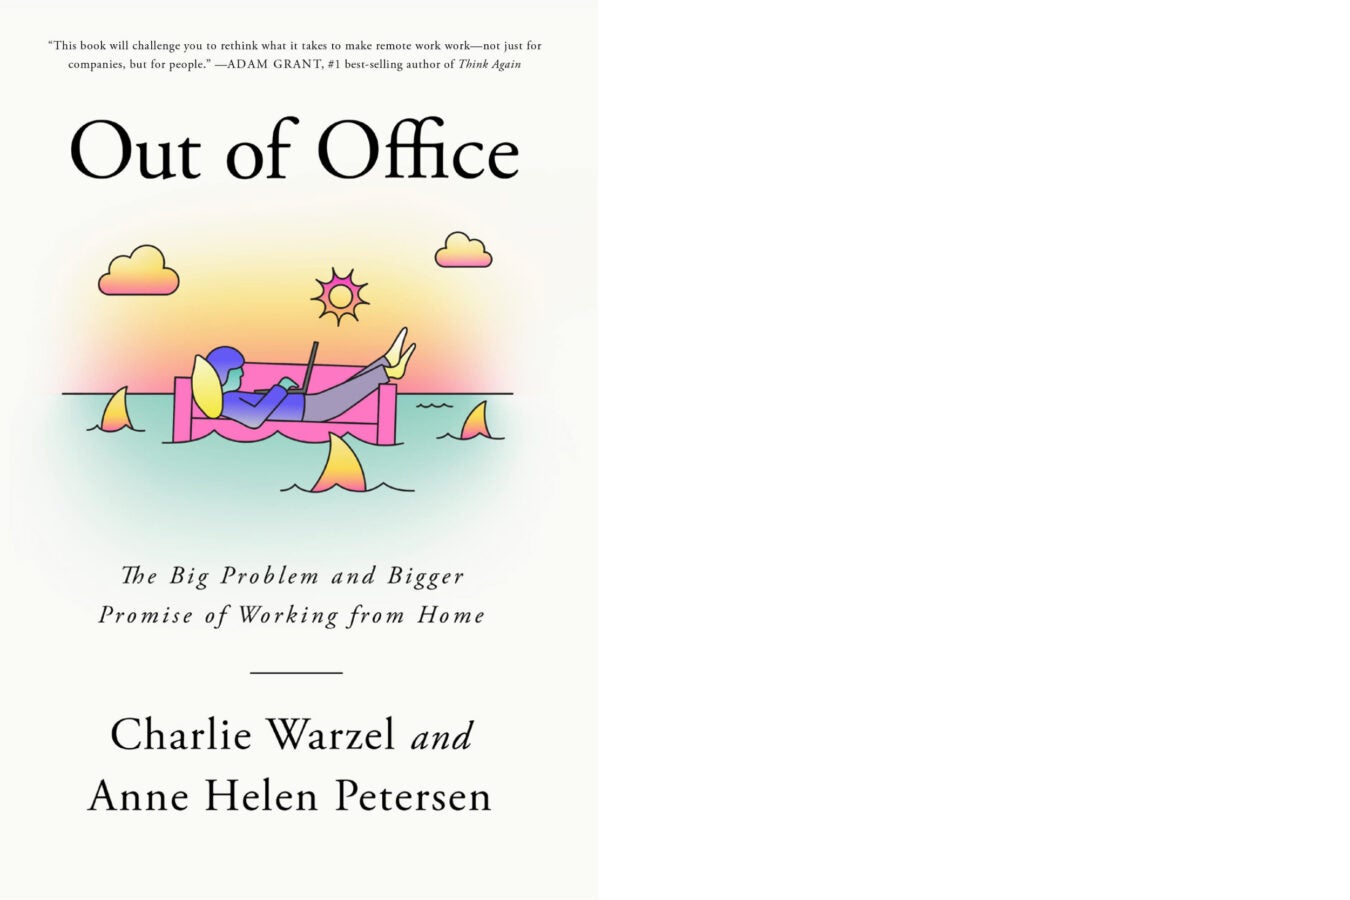 Book cover: “Out of Office: The Big Problem and Bigger Promise of Working from Home” by Charlie Warzel and Anne Helen Petersen.